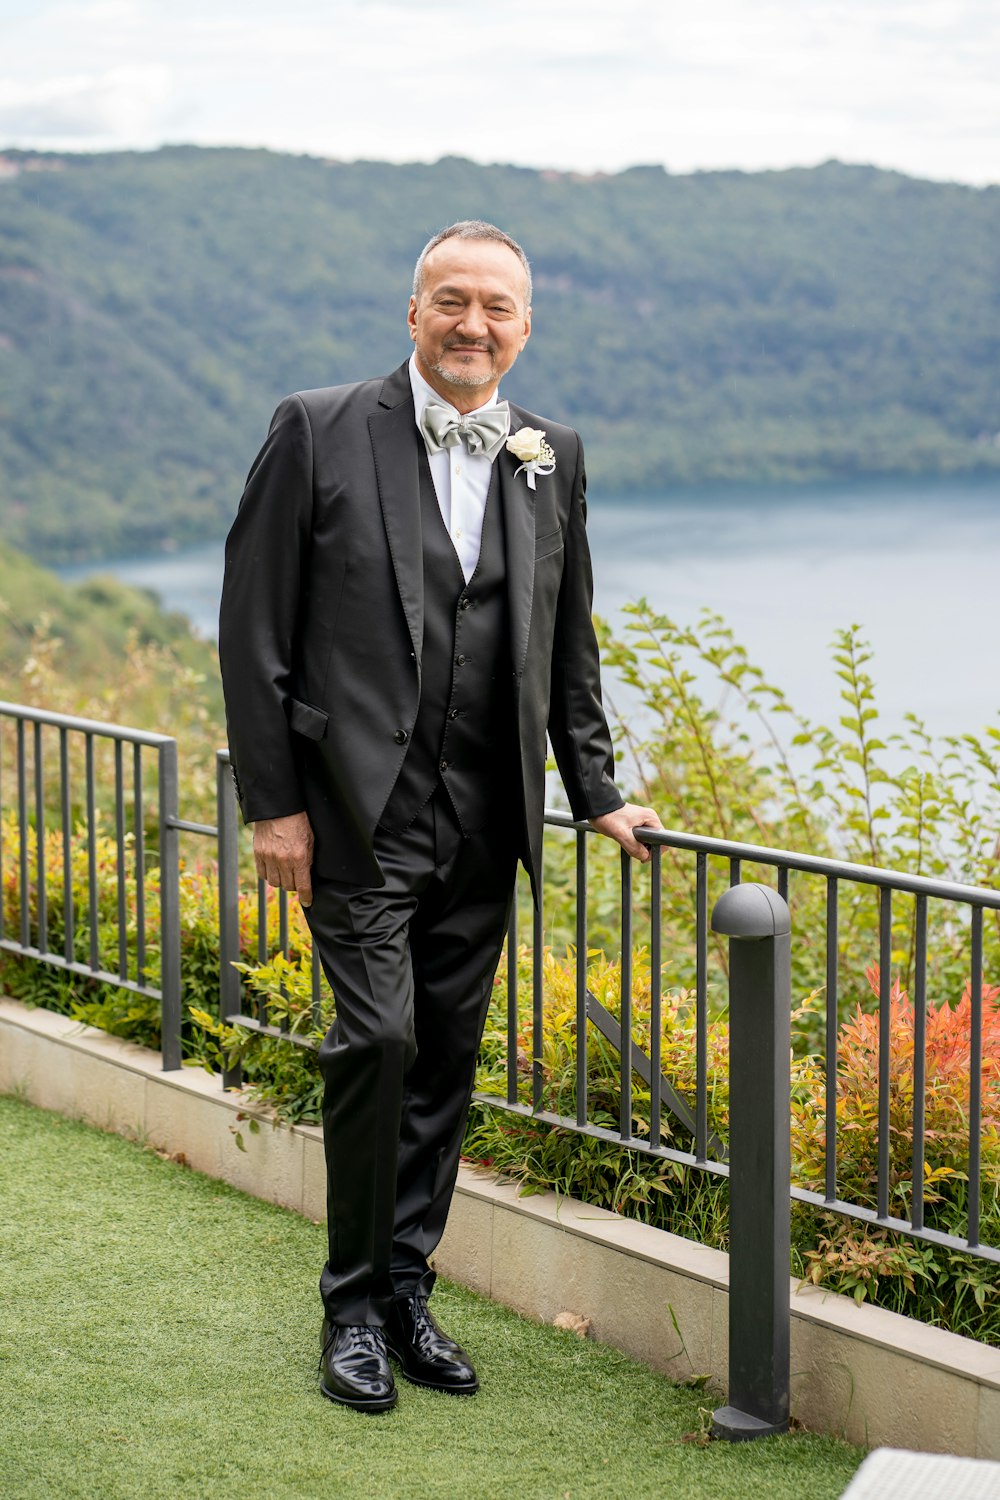 a man in a tuxedo standing next to a railing